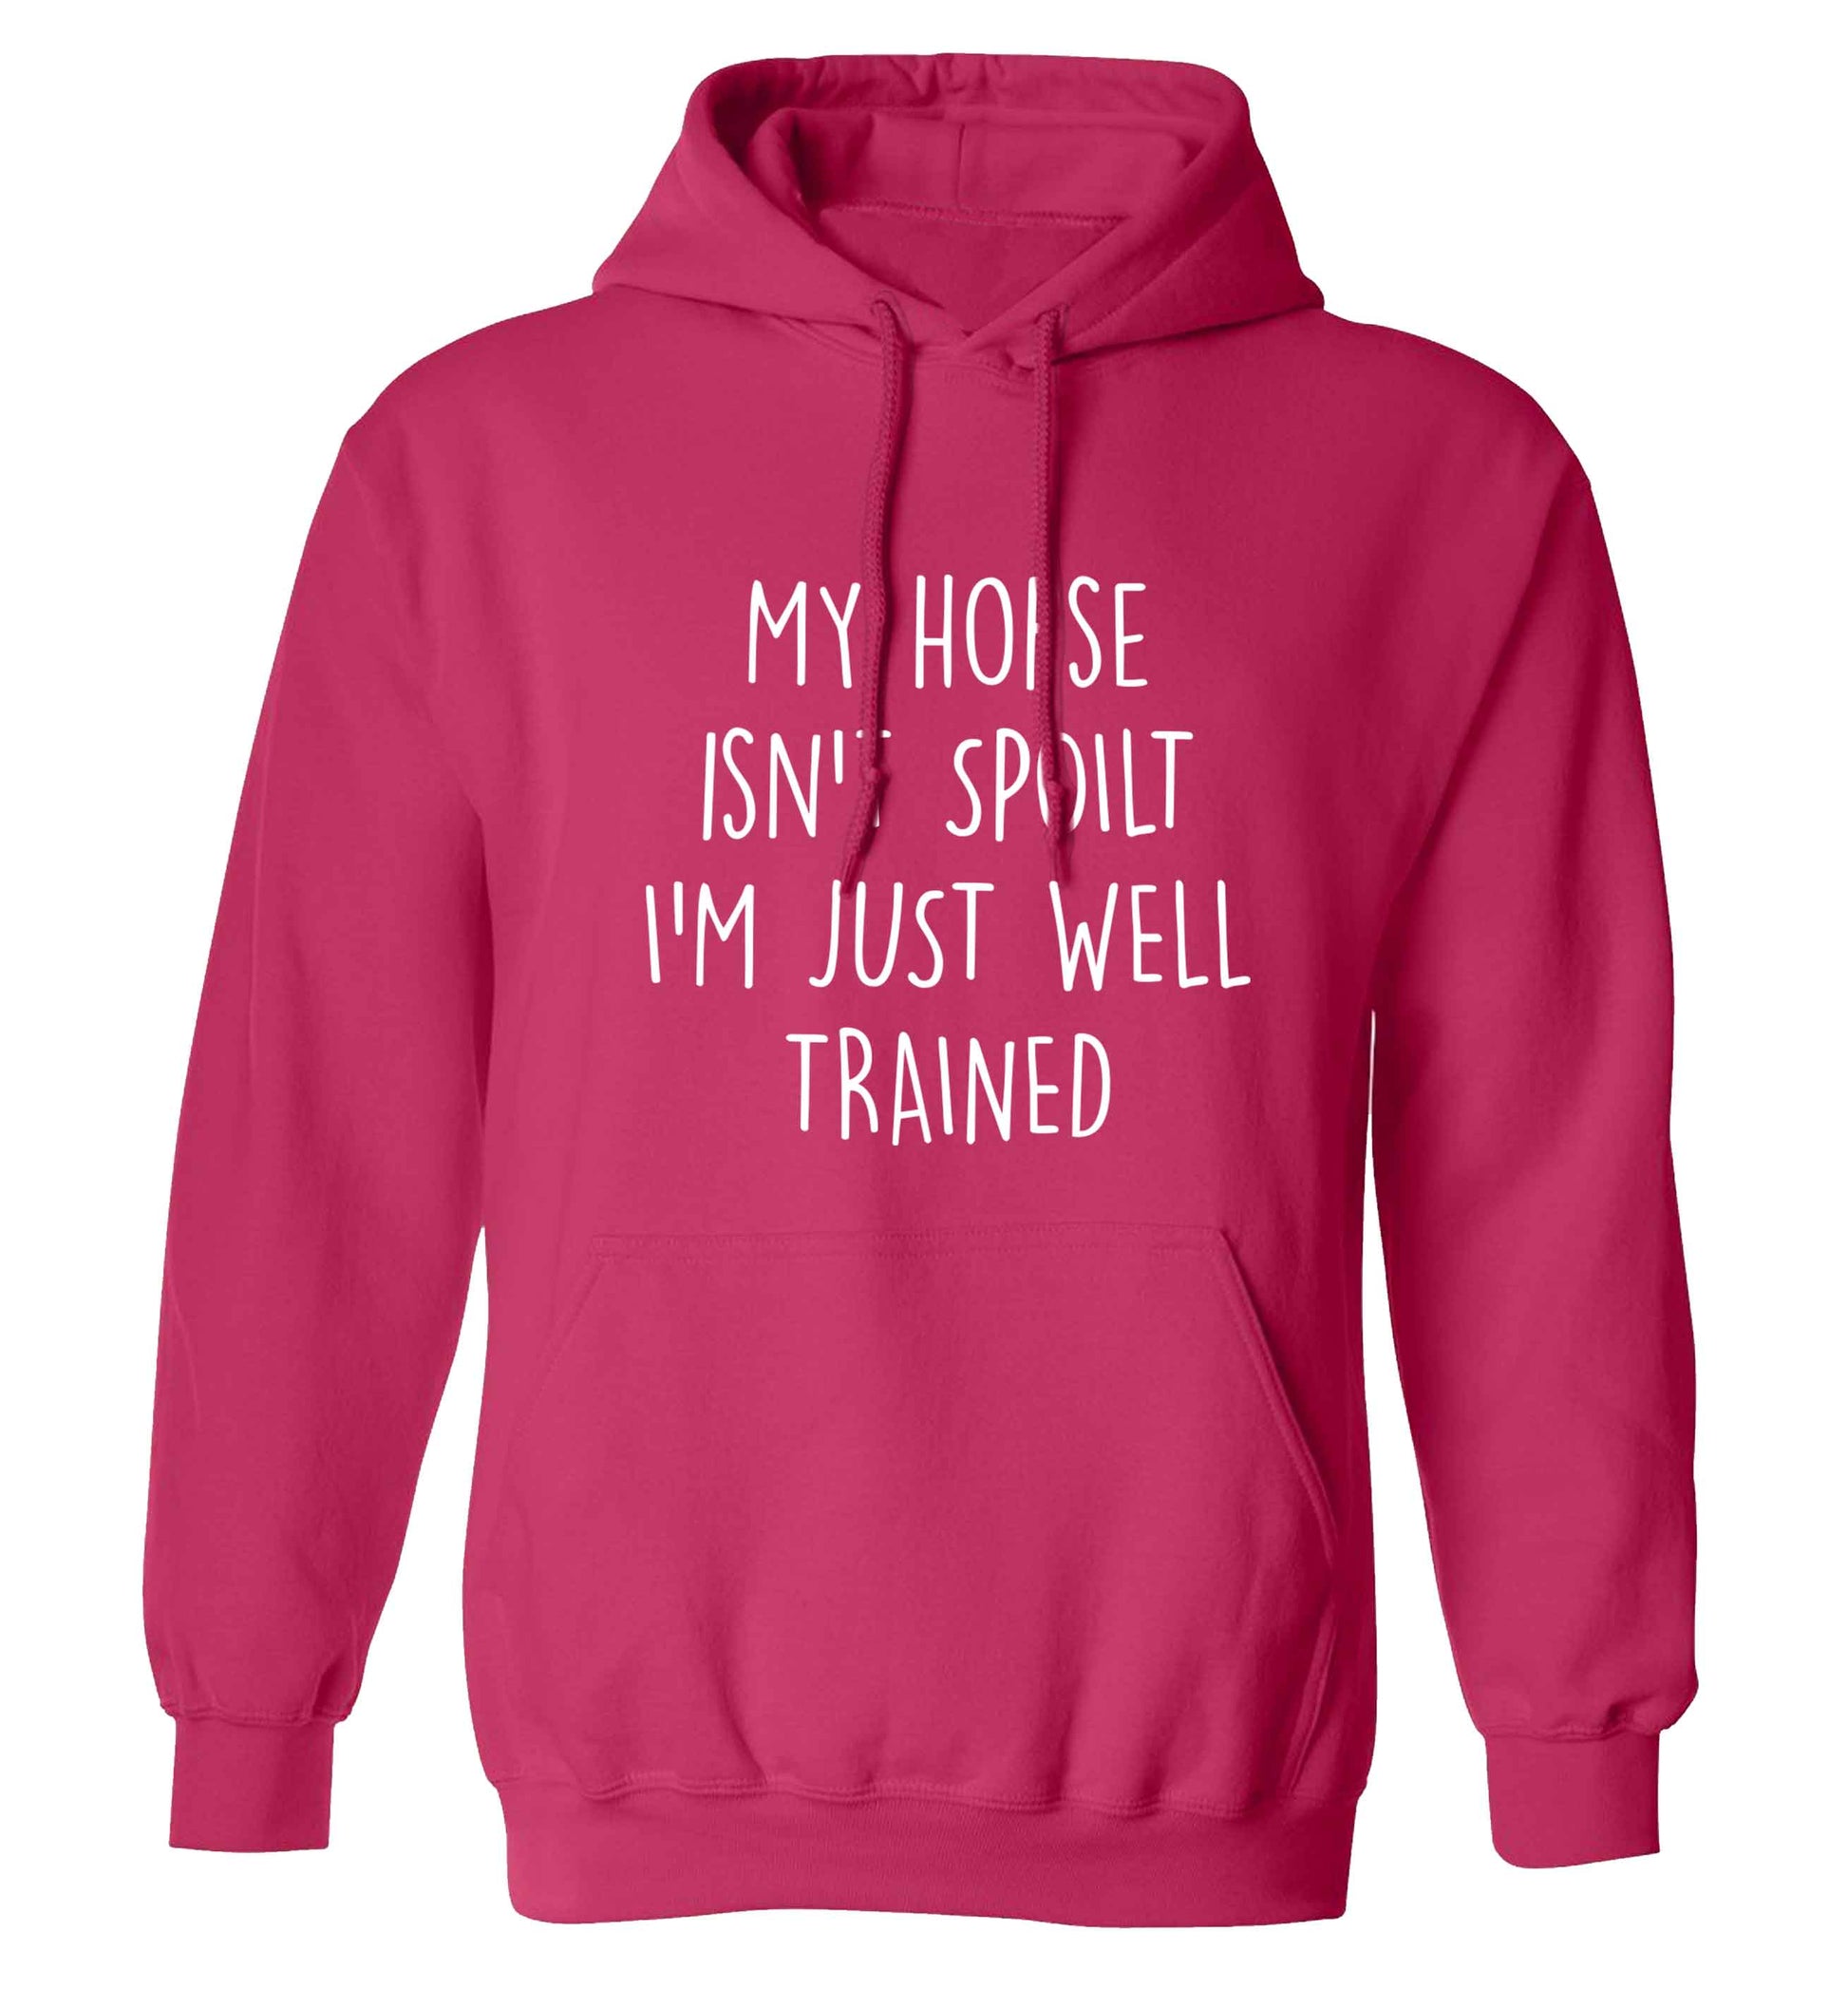 My horse isn't spoilt I'm just well trained adults unisex pink hoodie 2XL